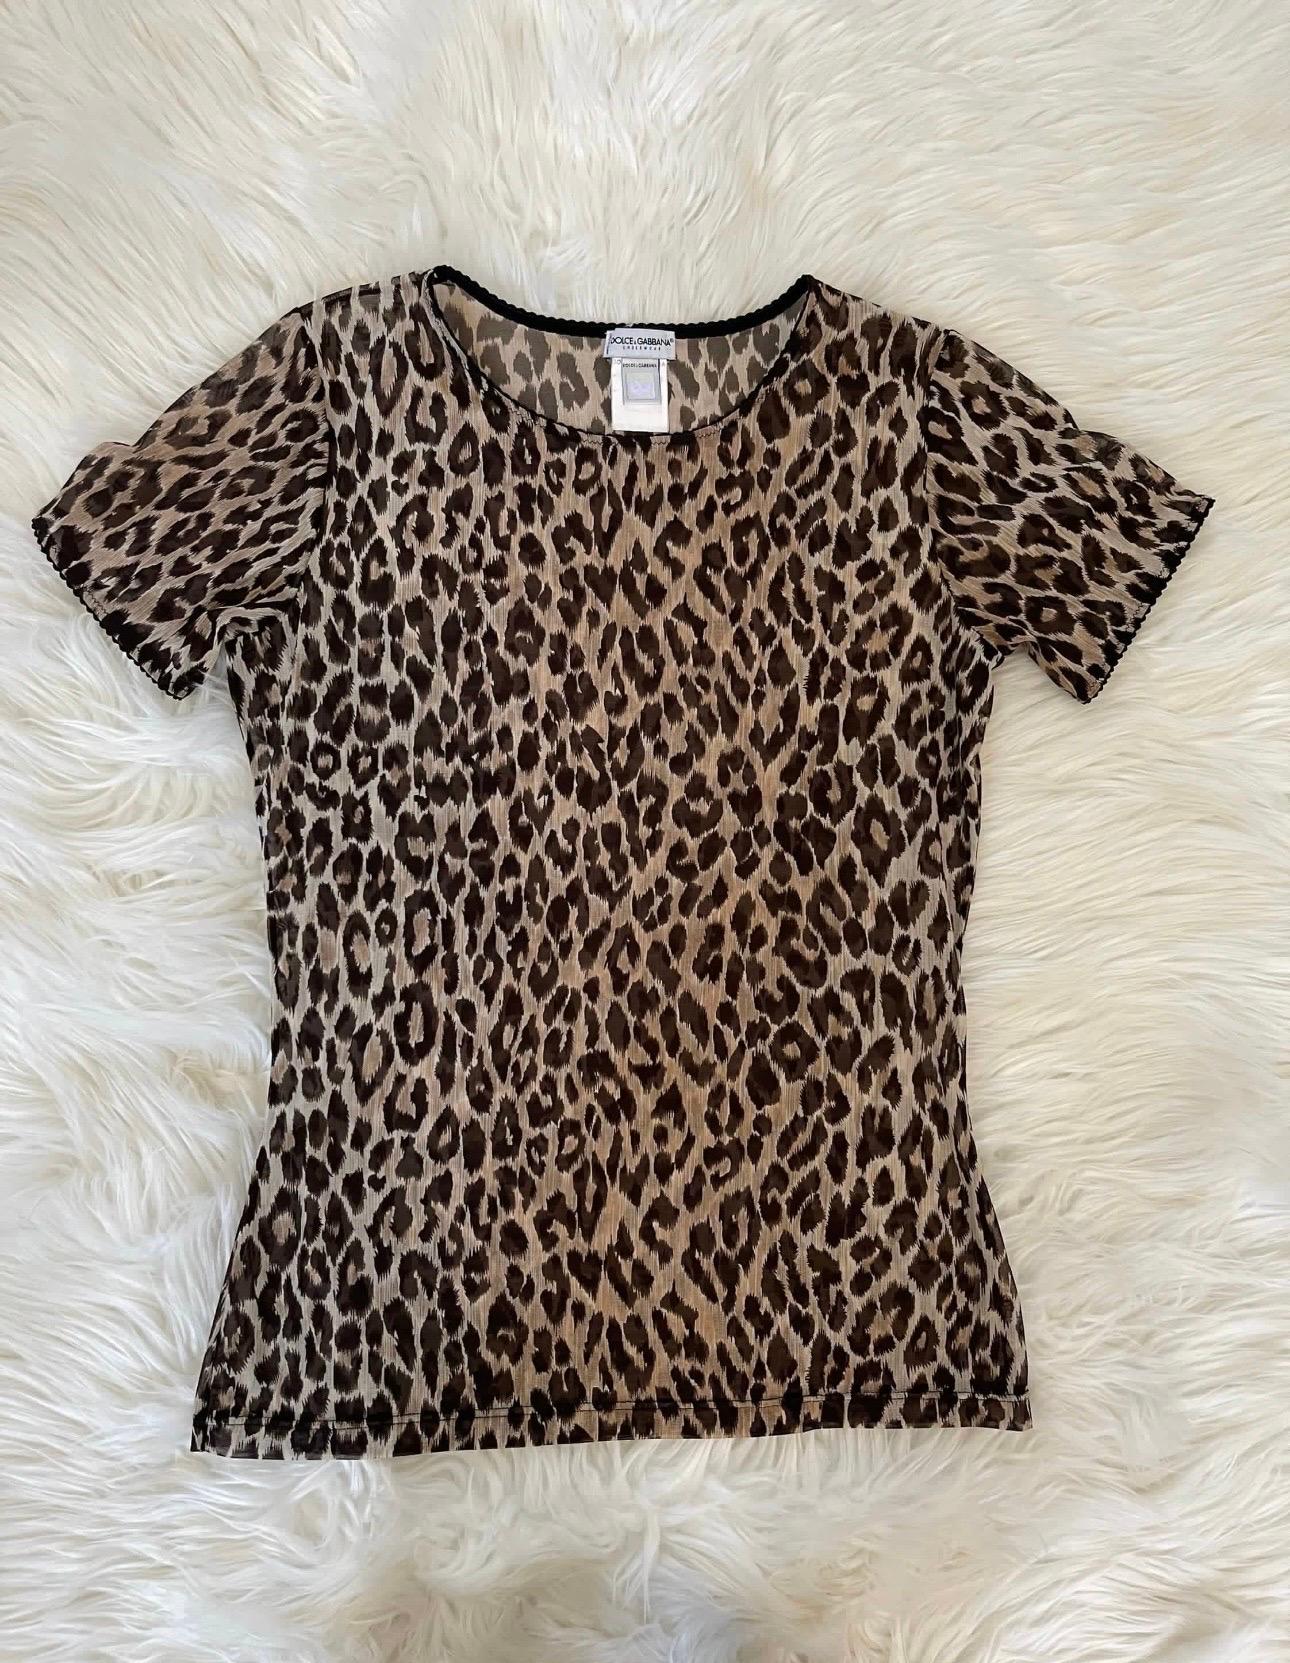 🖤Dolce & Gabbana Perfection🖤

Vintage Dolce & Gabbana stunning early 2000s sheer cheetah print top.

Fitted and totally on trend with the body hugging style. With delicate details on sleeves which make this an edgy, and feminine combination.